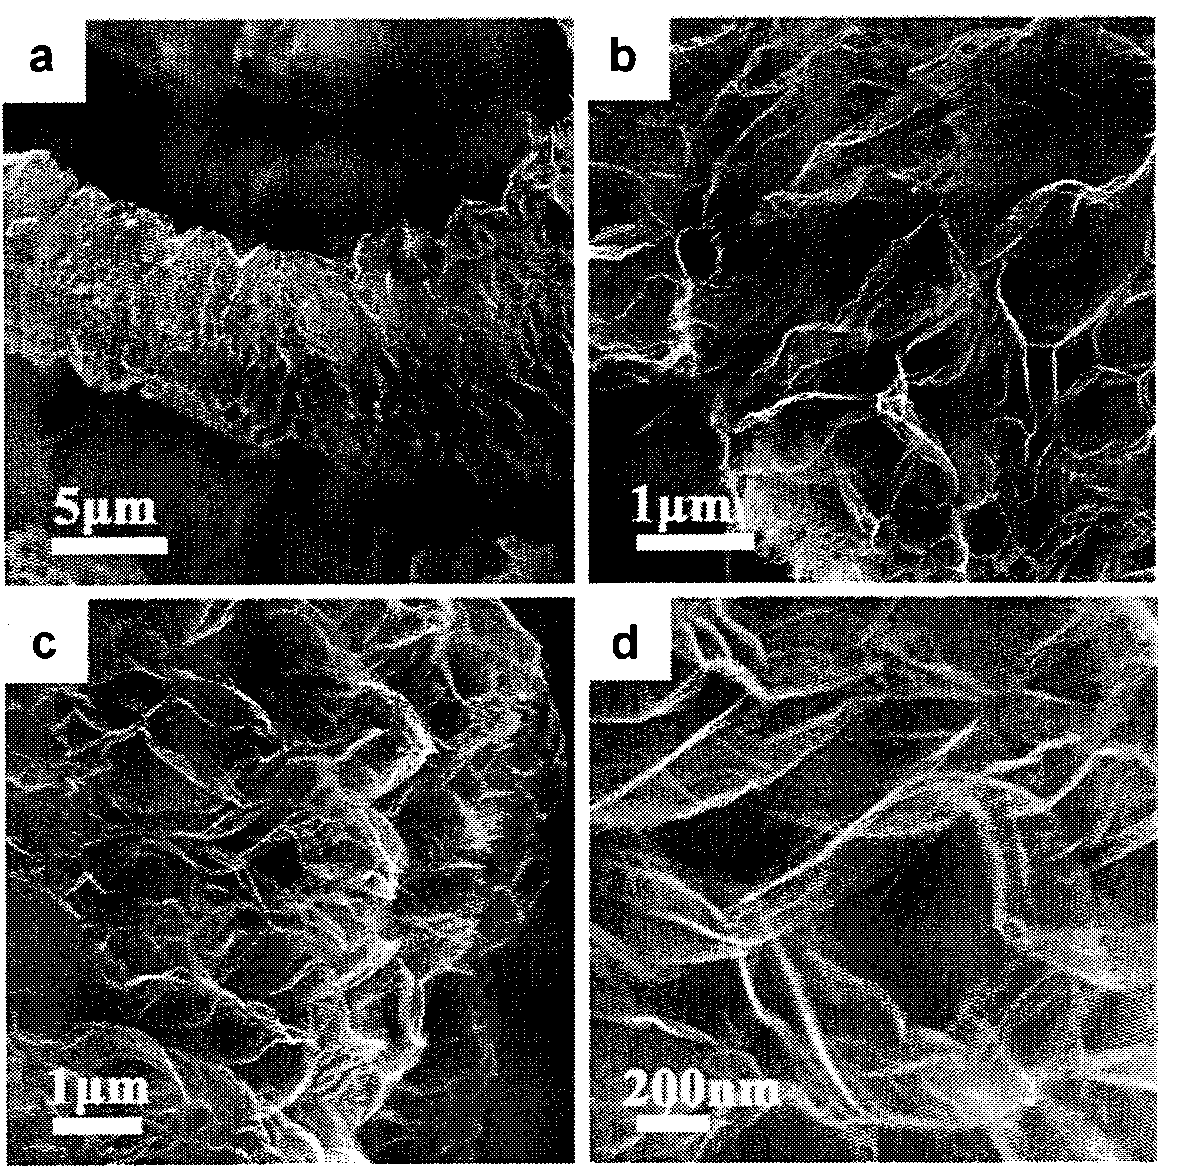 Method for massively preparing graphene with excellent electrical conductivity and thermal stability